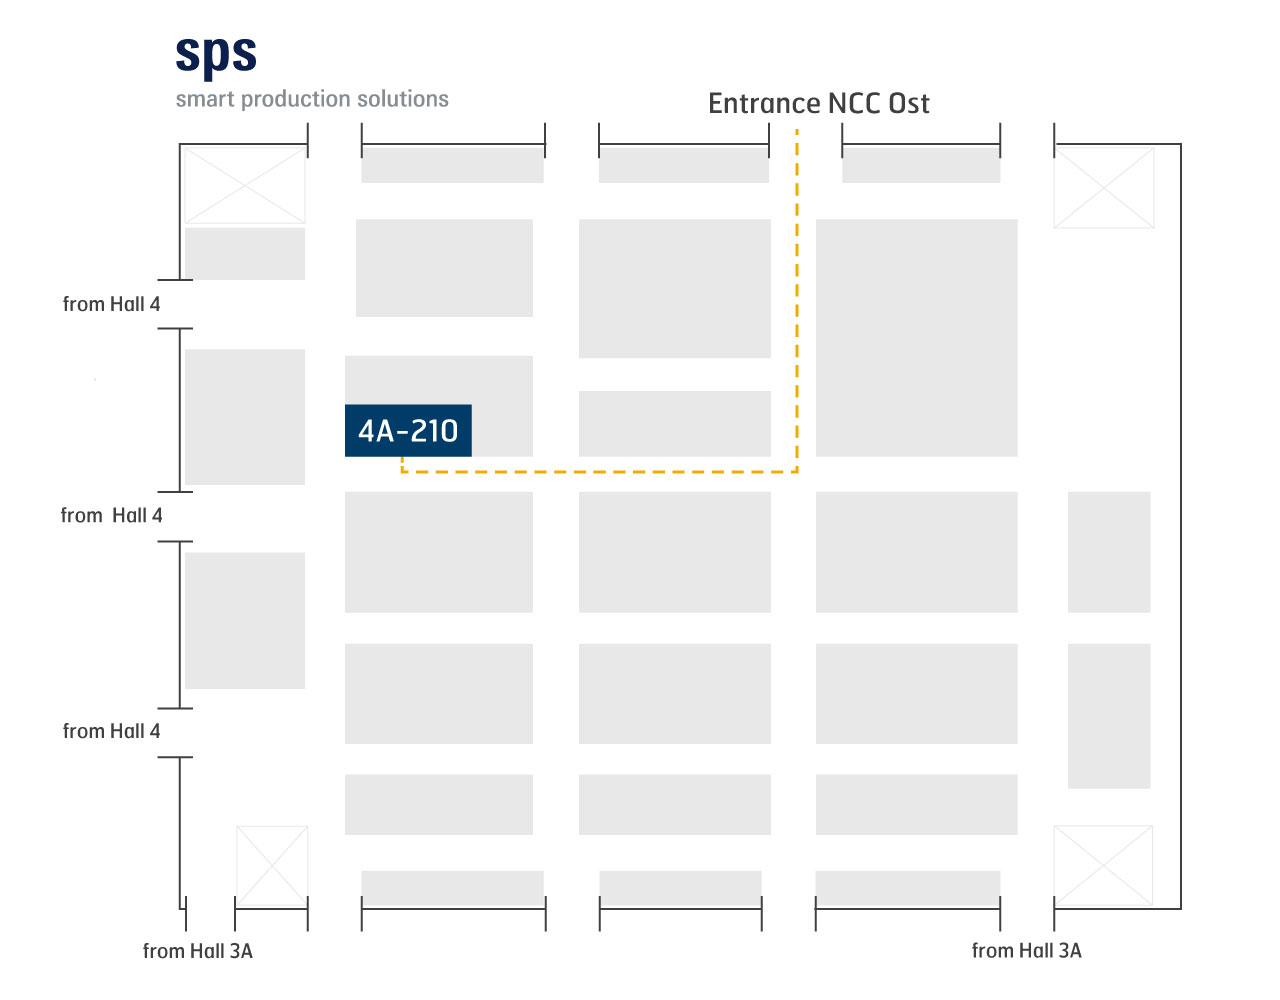 Find us in Hall 4A Booth 210 at SPS Nuremberg 2021